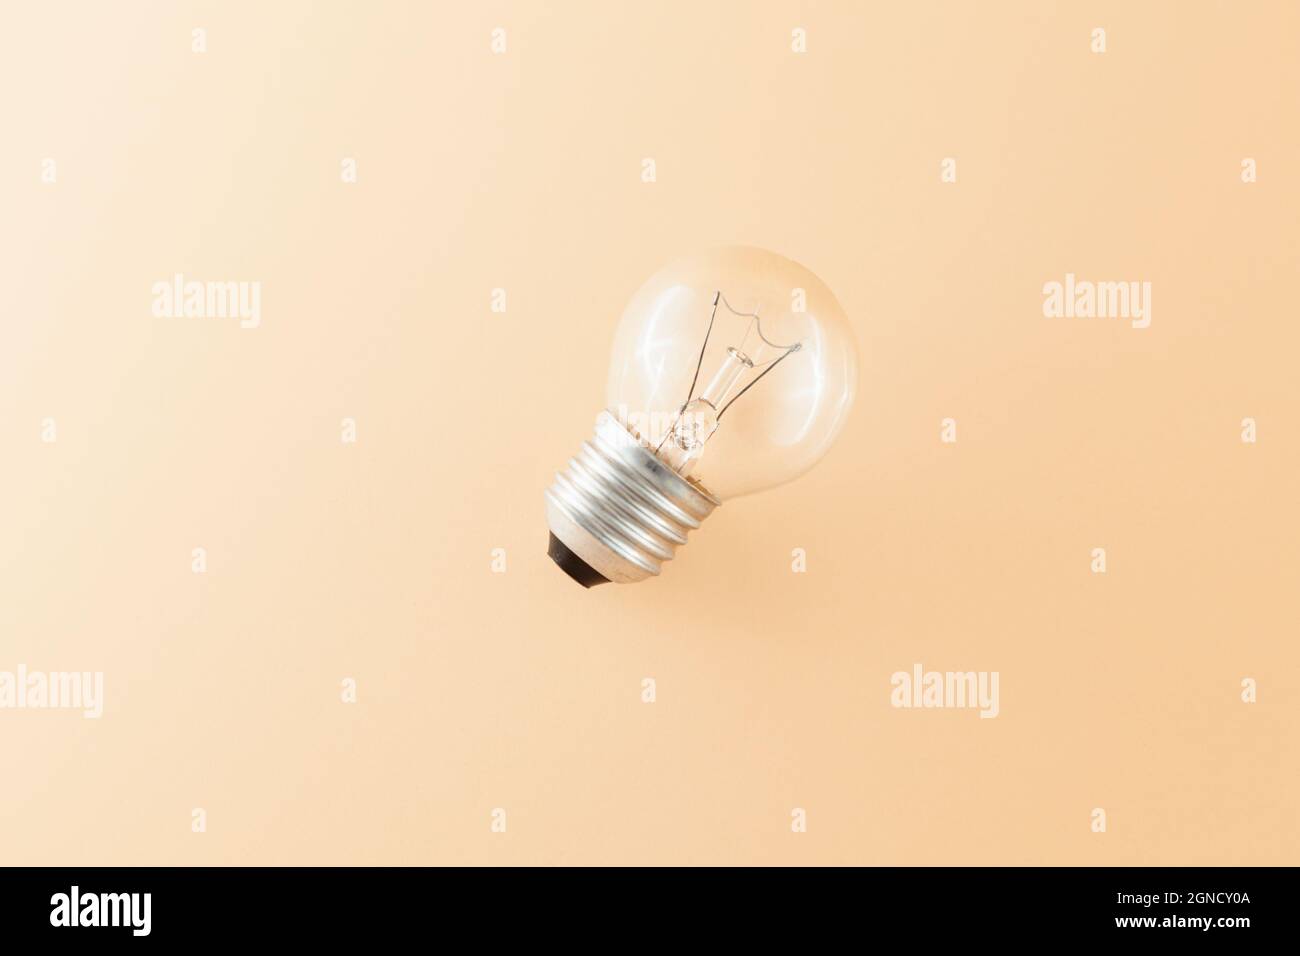 Top view of a round tungsten filament bulb isolated on a beige background. Stock Photo